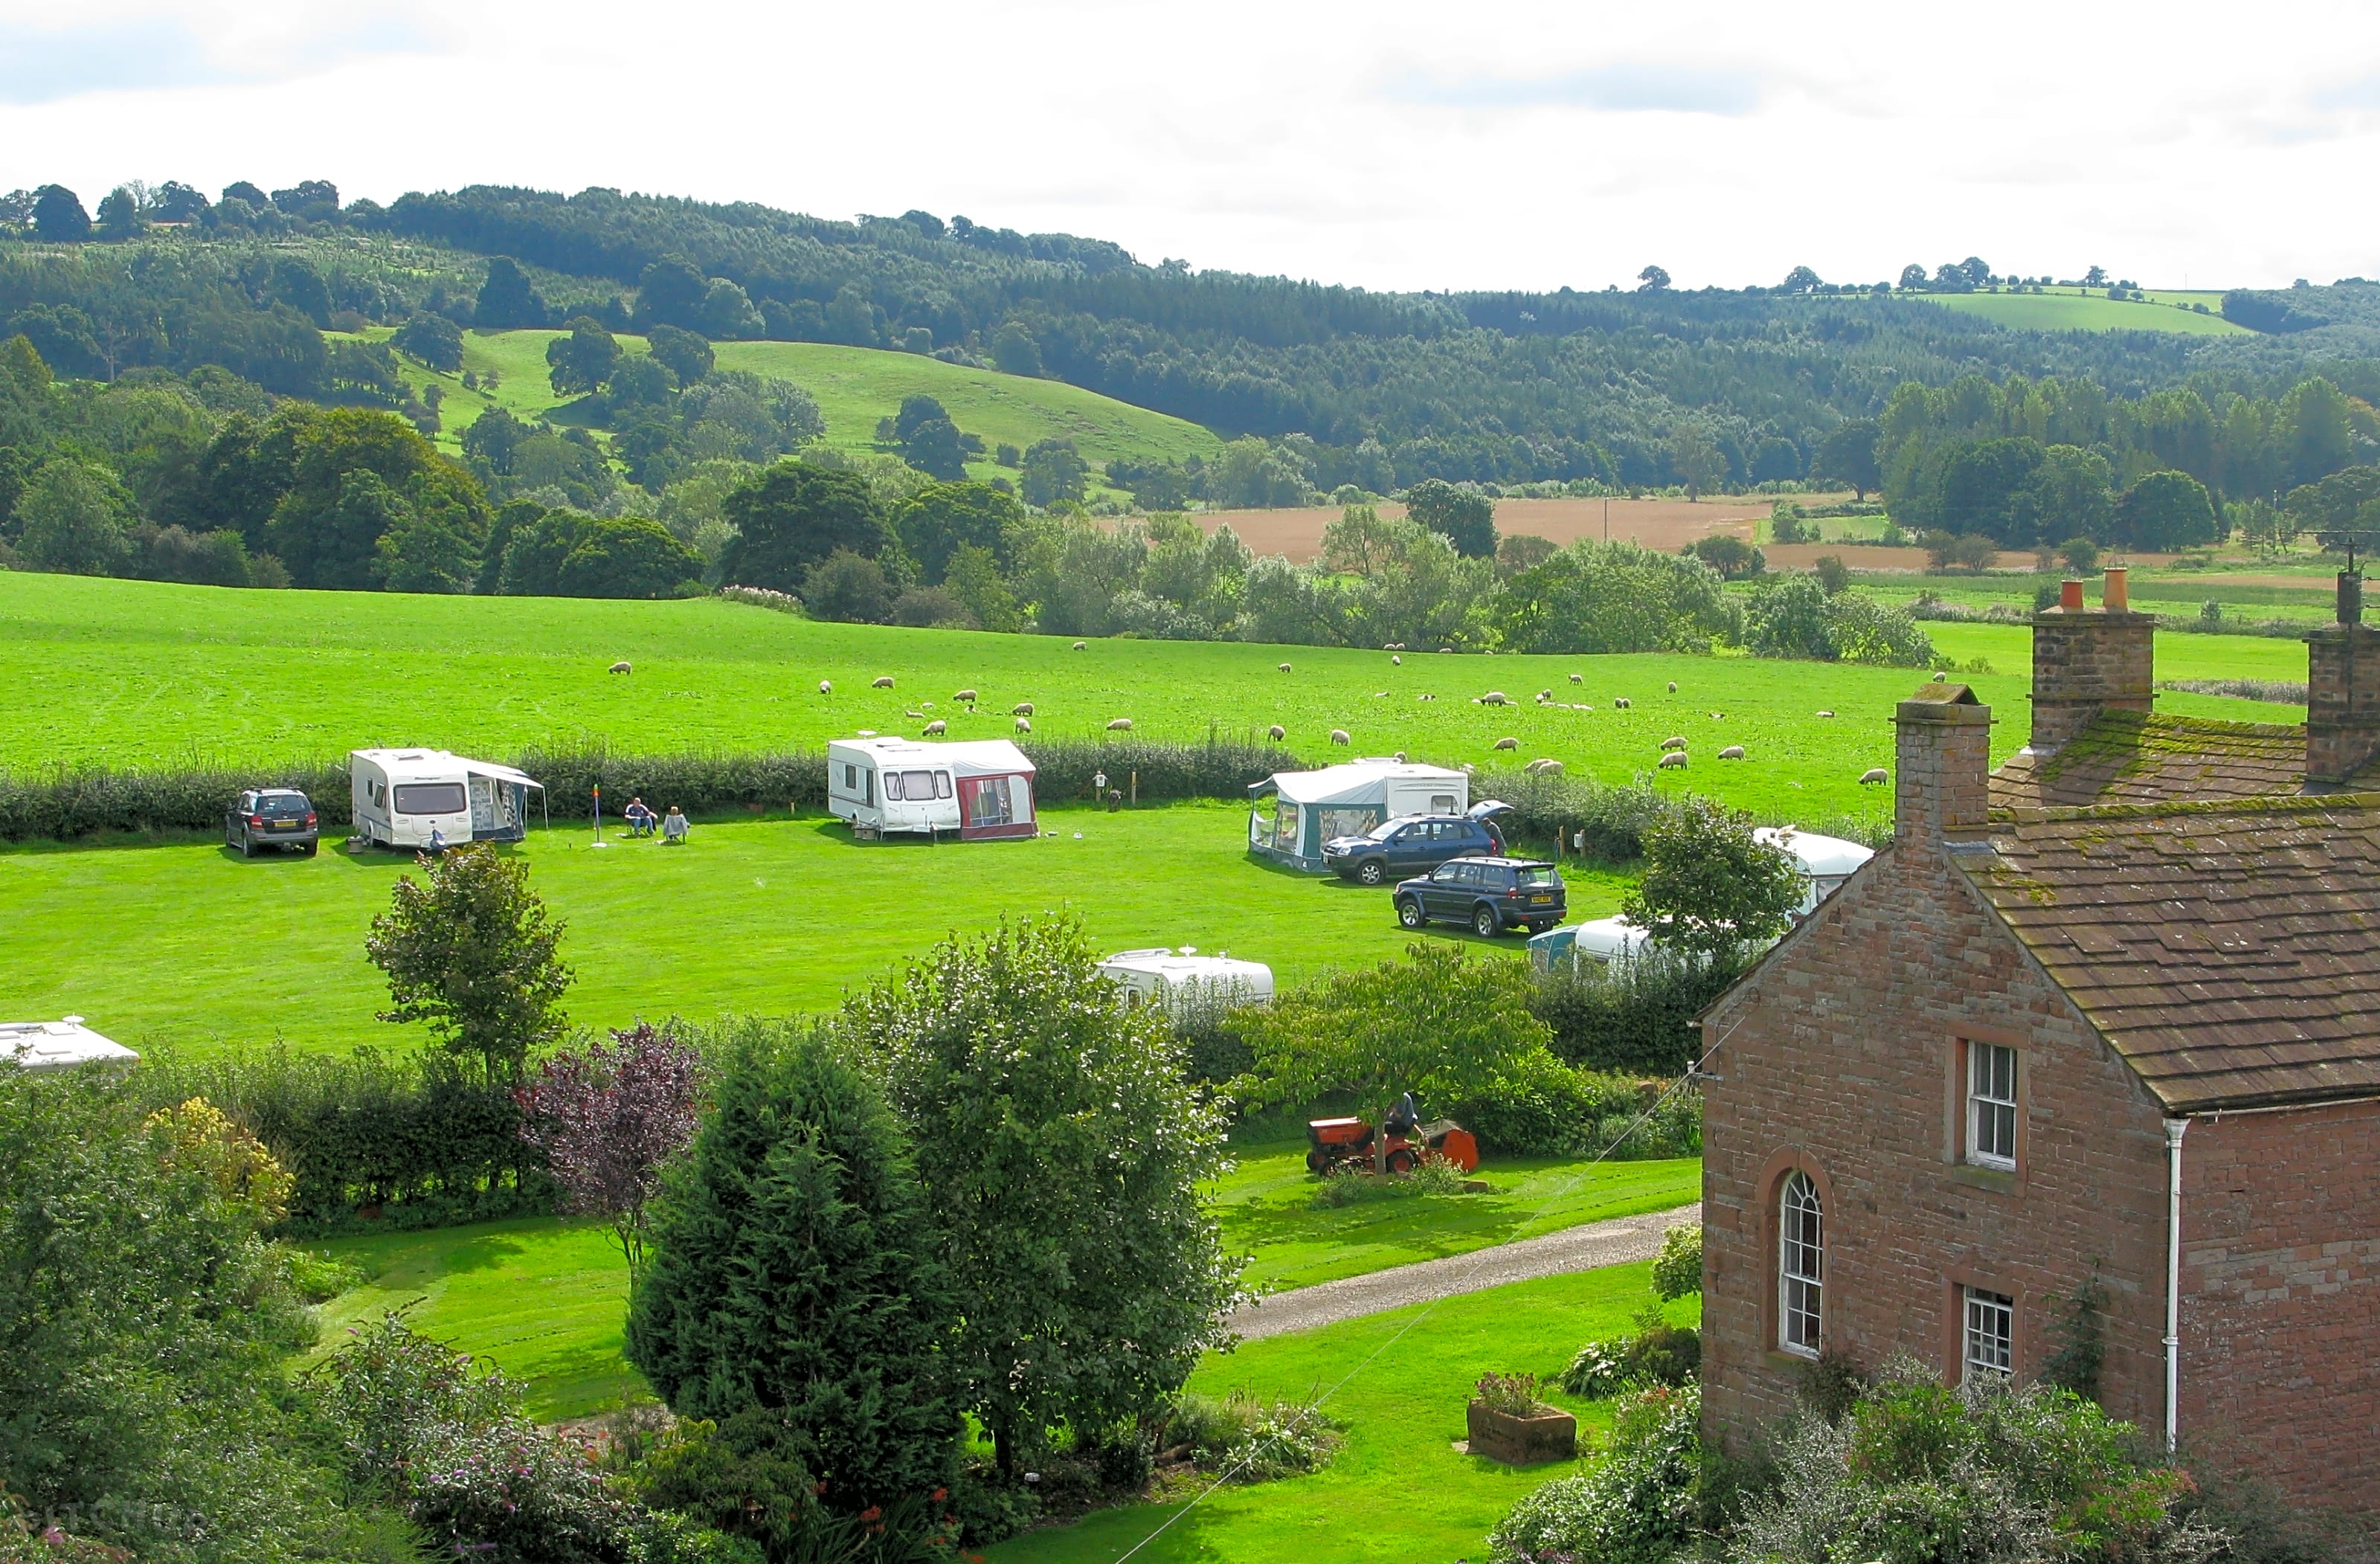 Mains Farm Camping And Caravan Site Penrith Updated 2020 Prices Pitchup®